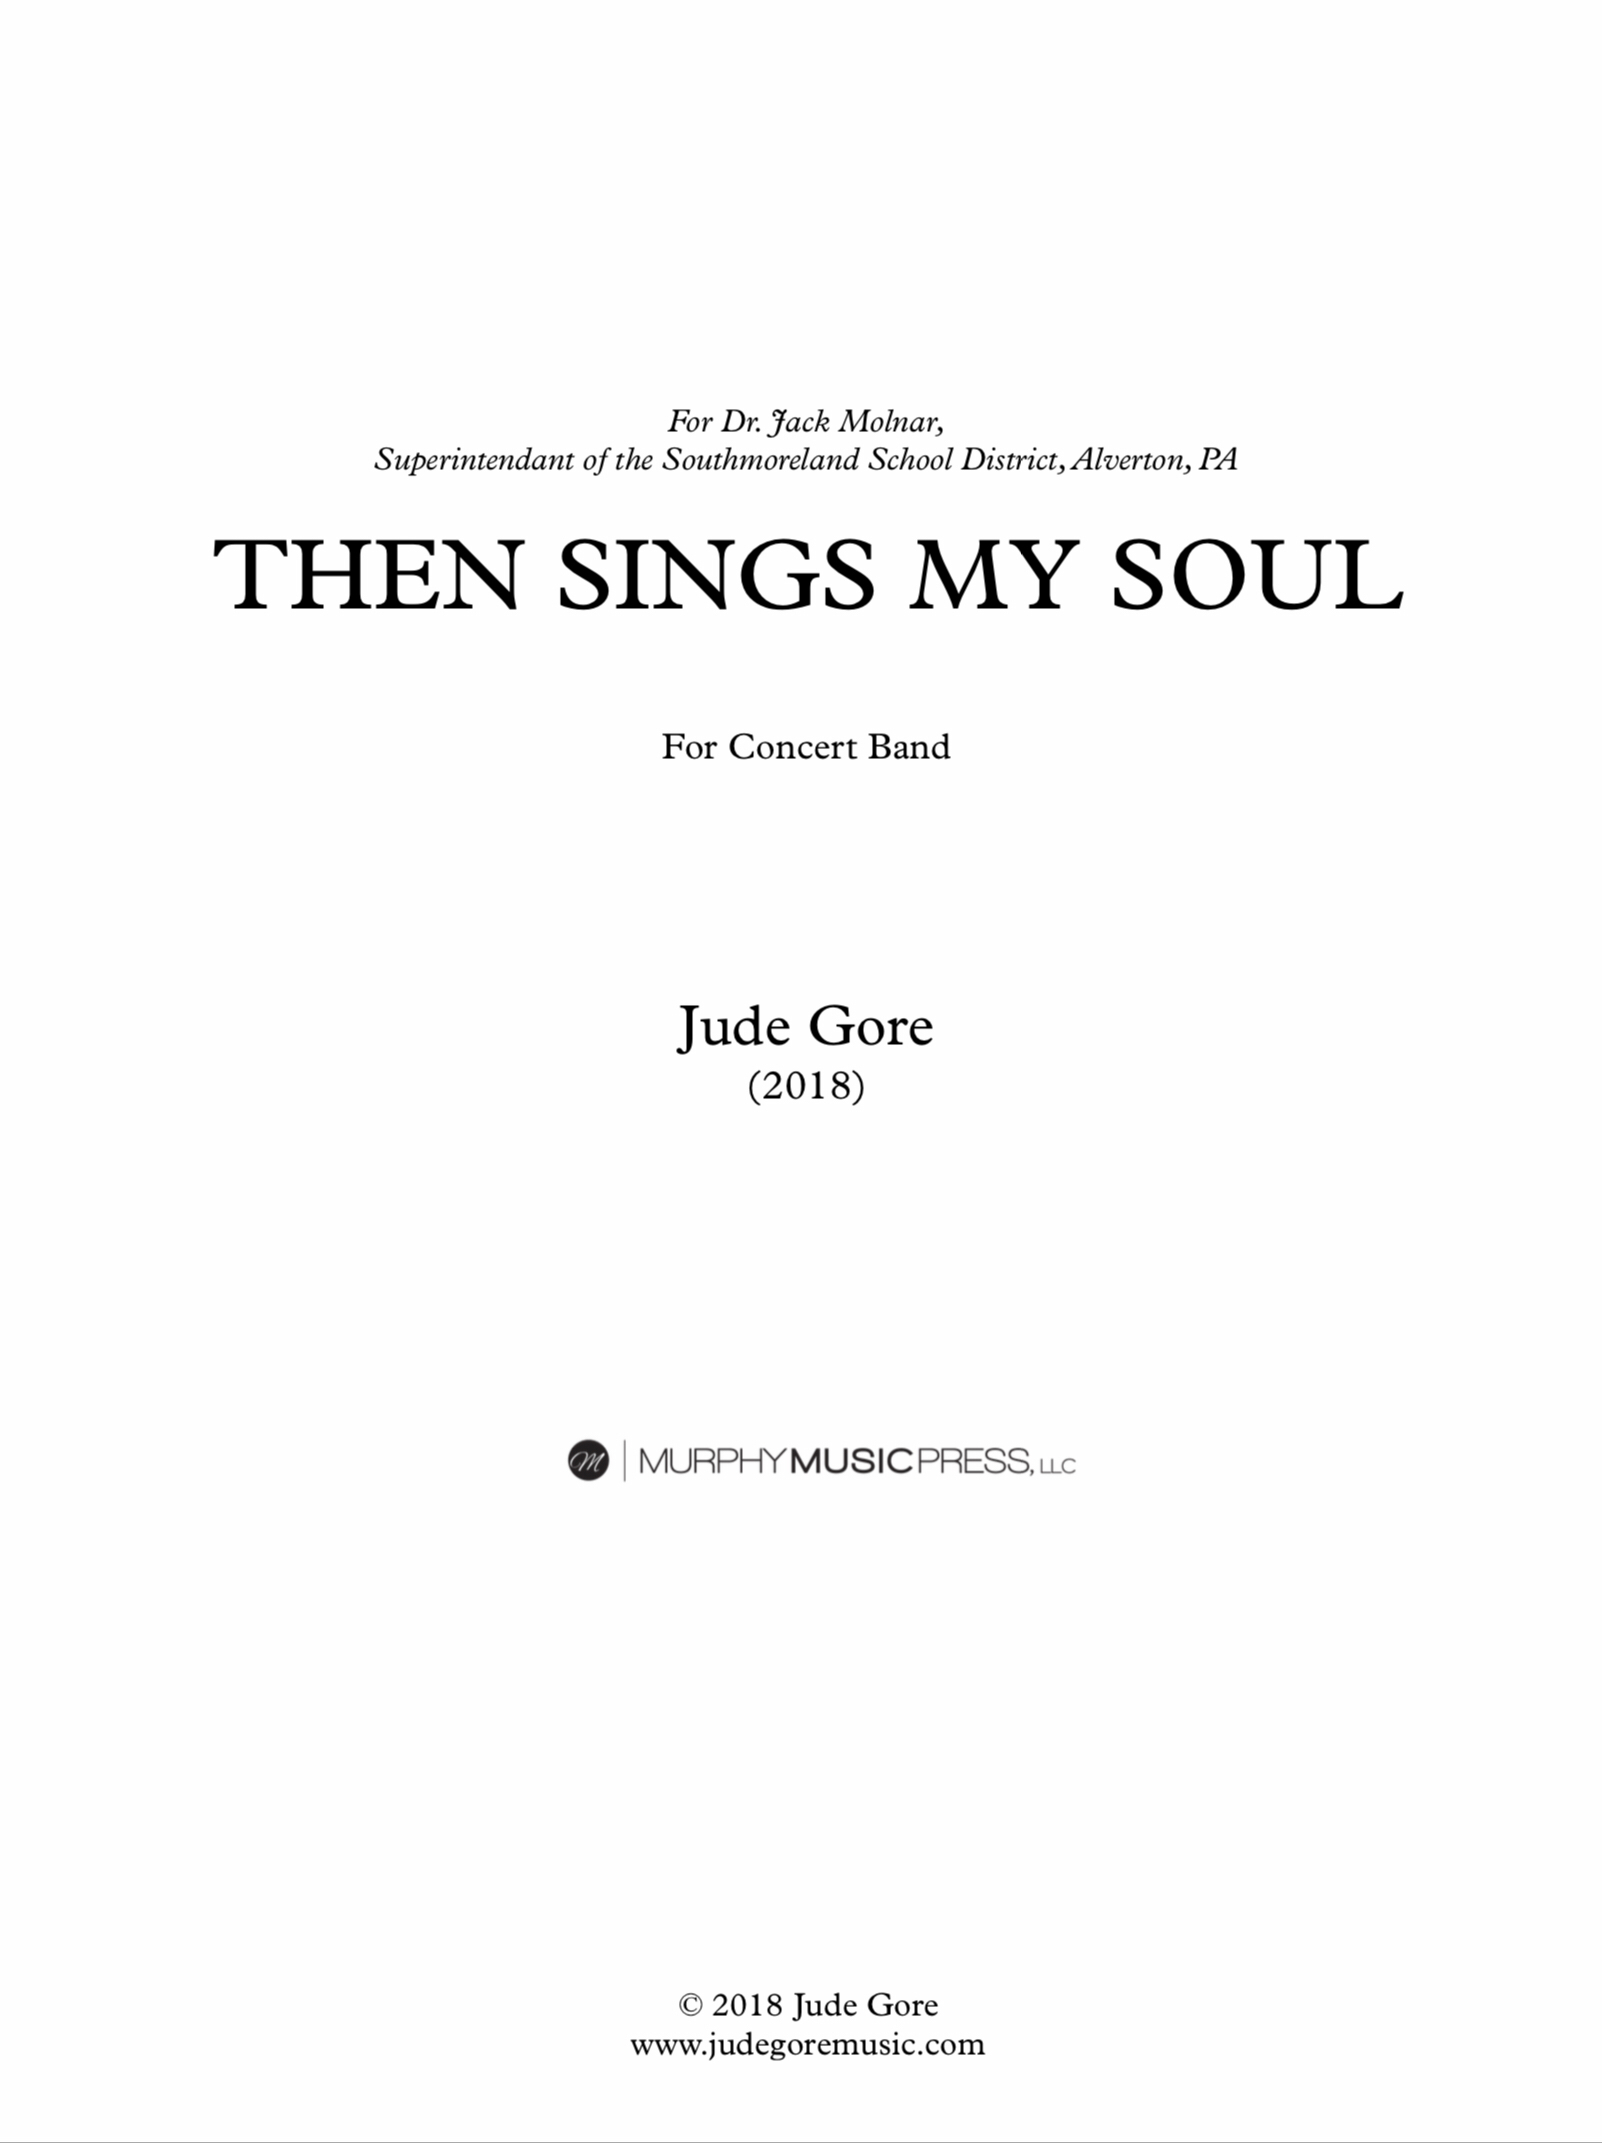 Then Sings My Soul by Jude Gore